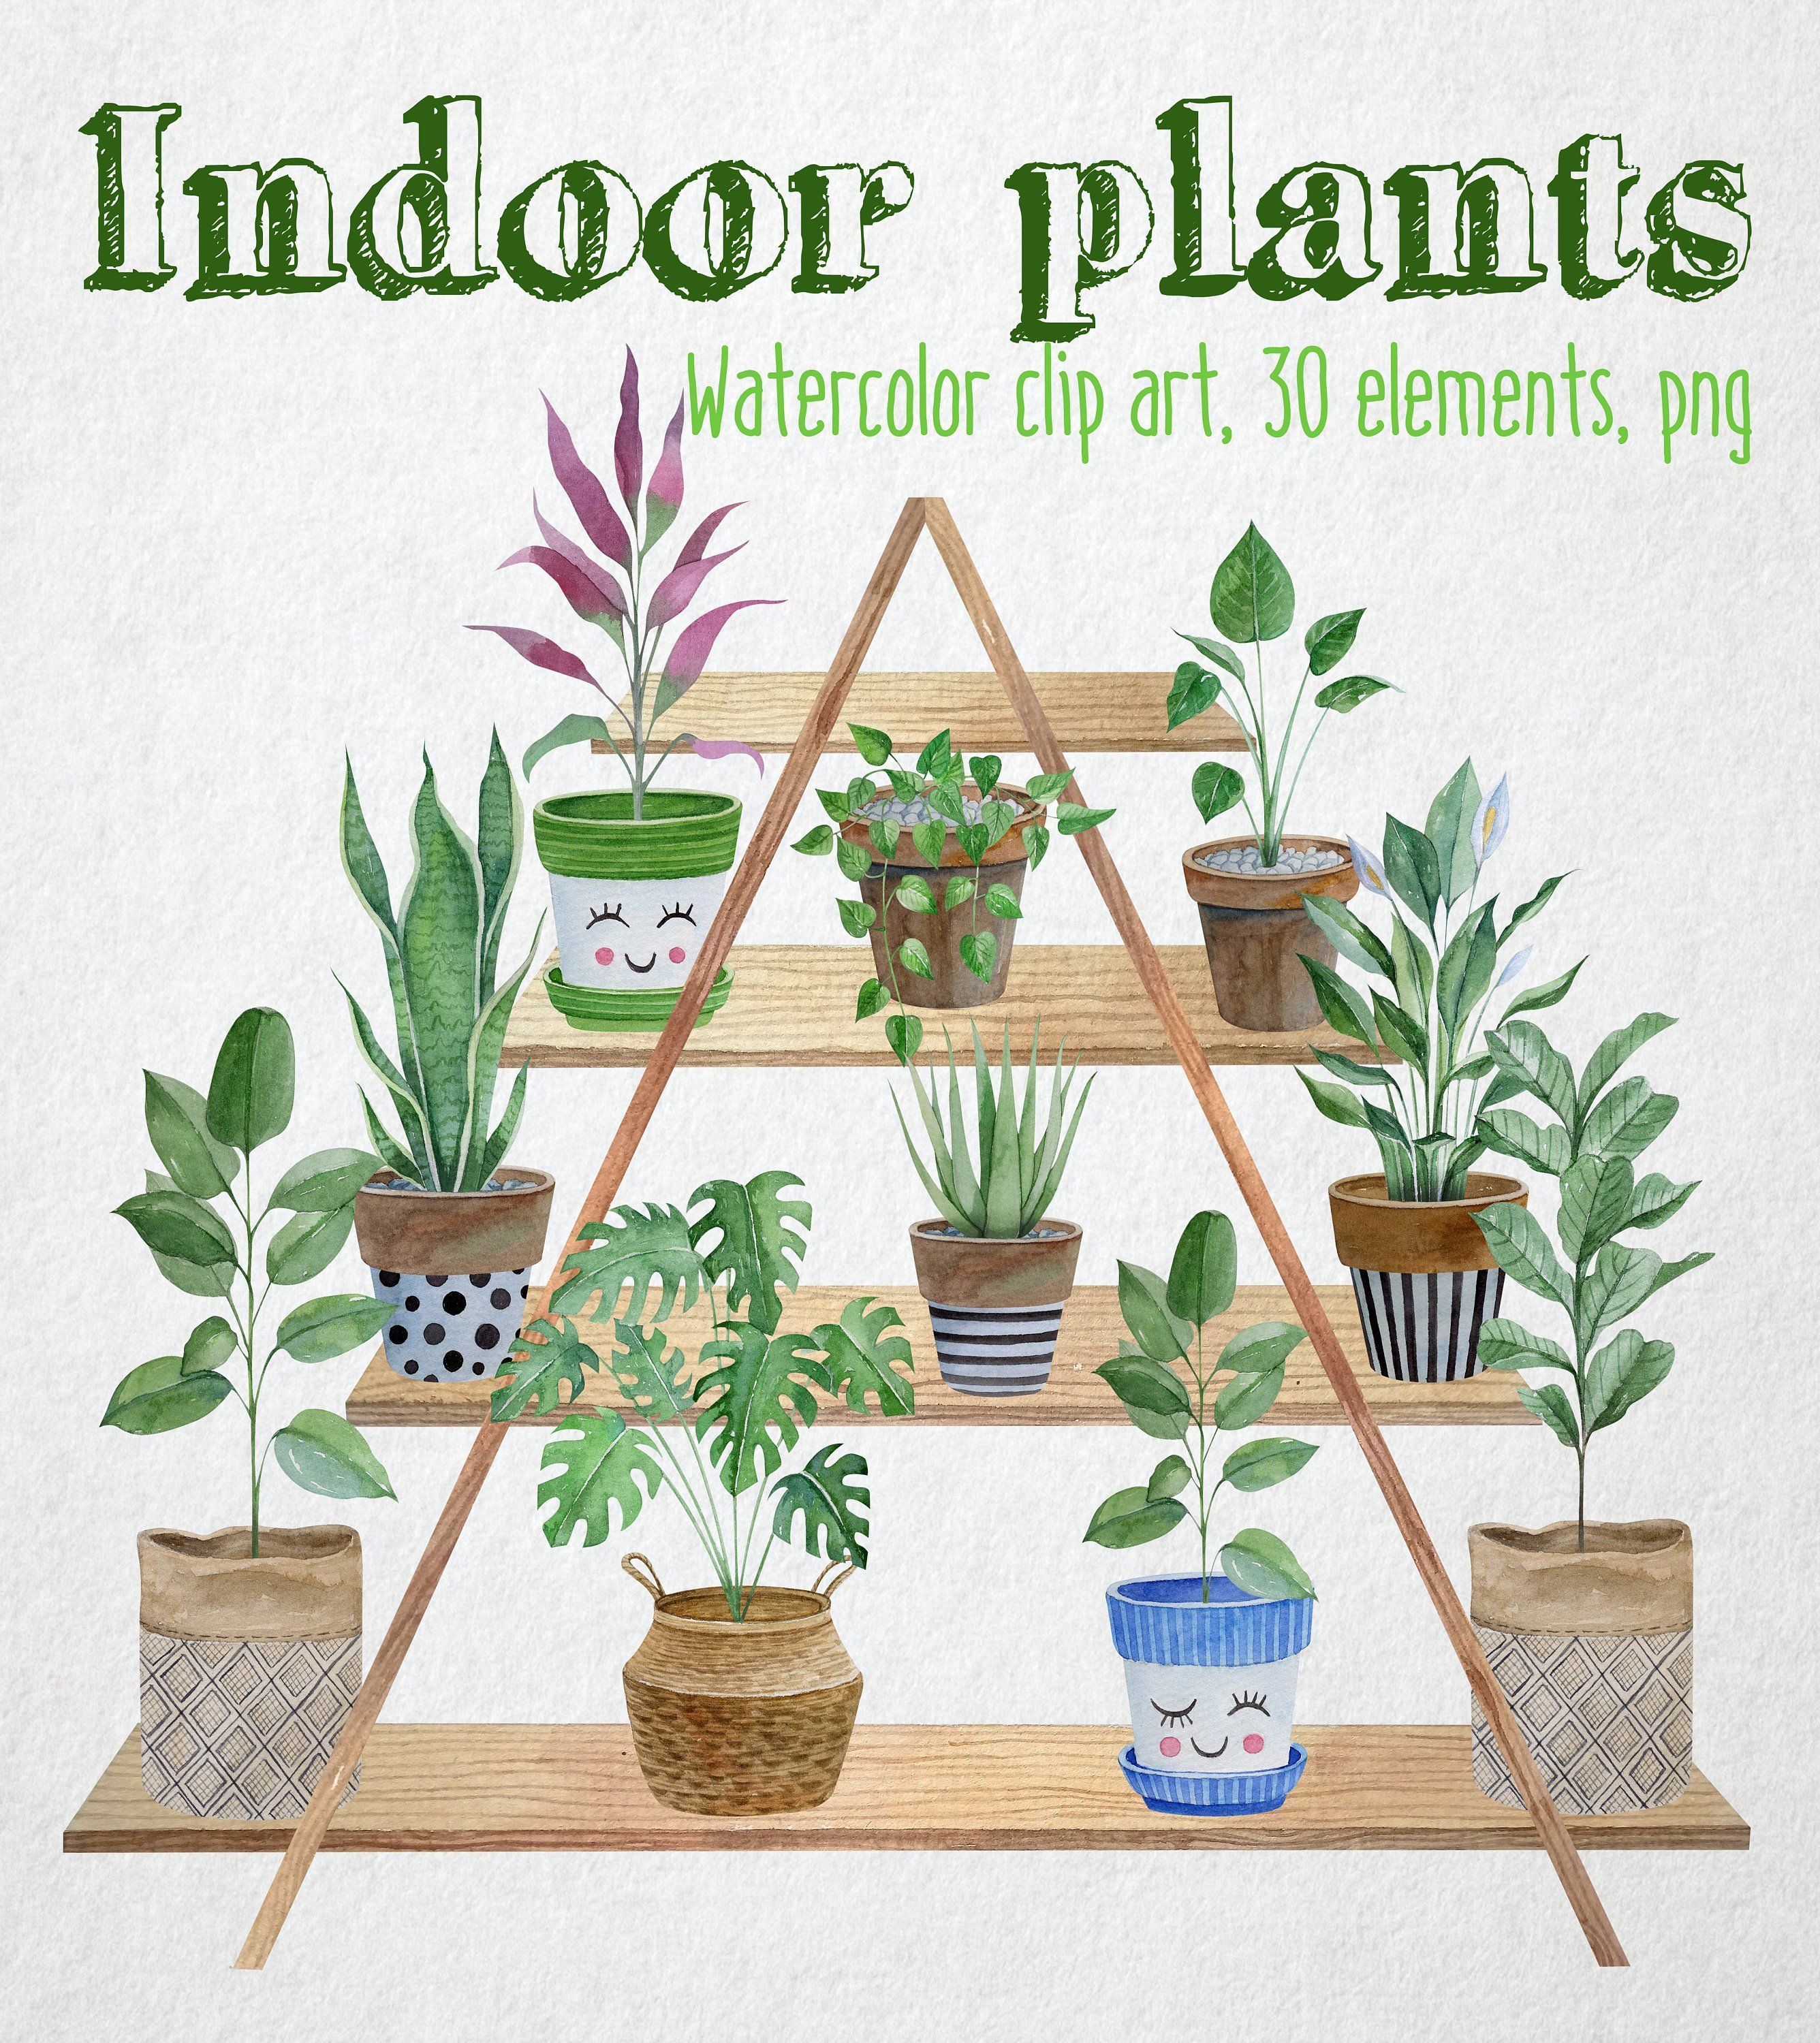 Indoor Plants watercolor clipart. Potted plants illustration. Watercolor house plants in ceramic pots -   17 indoor plants Watercolor ideas